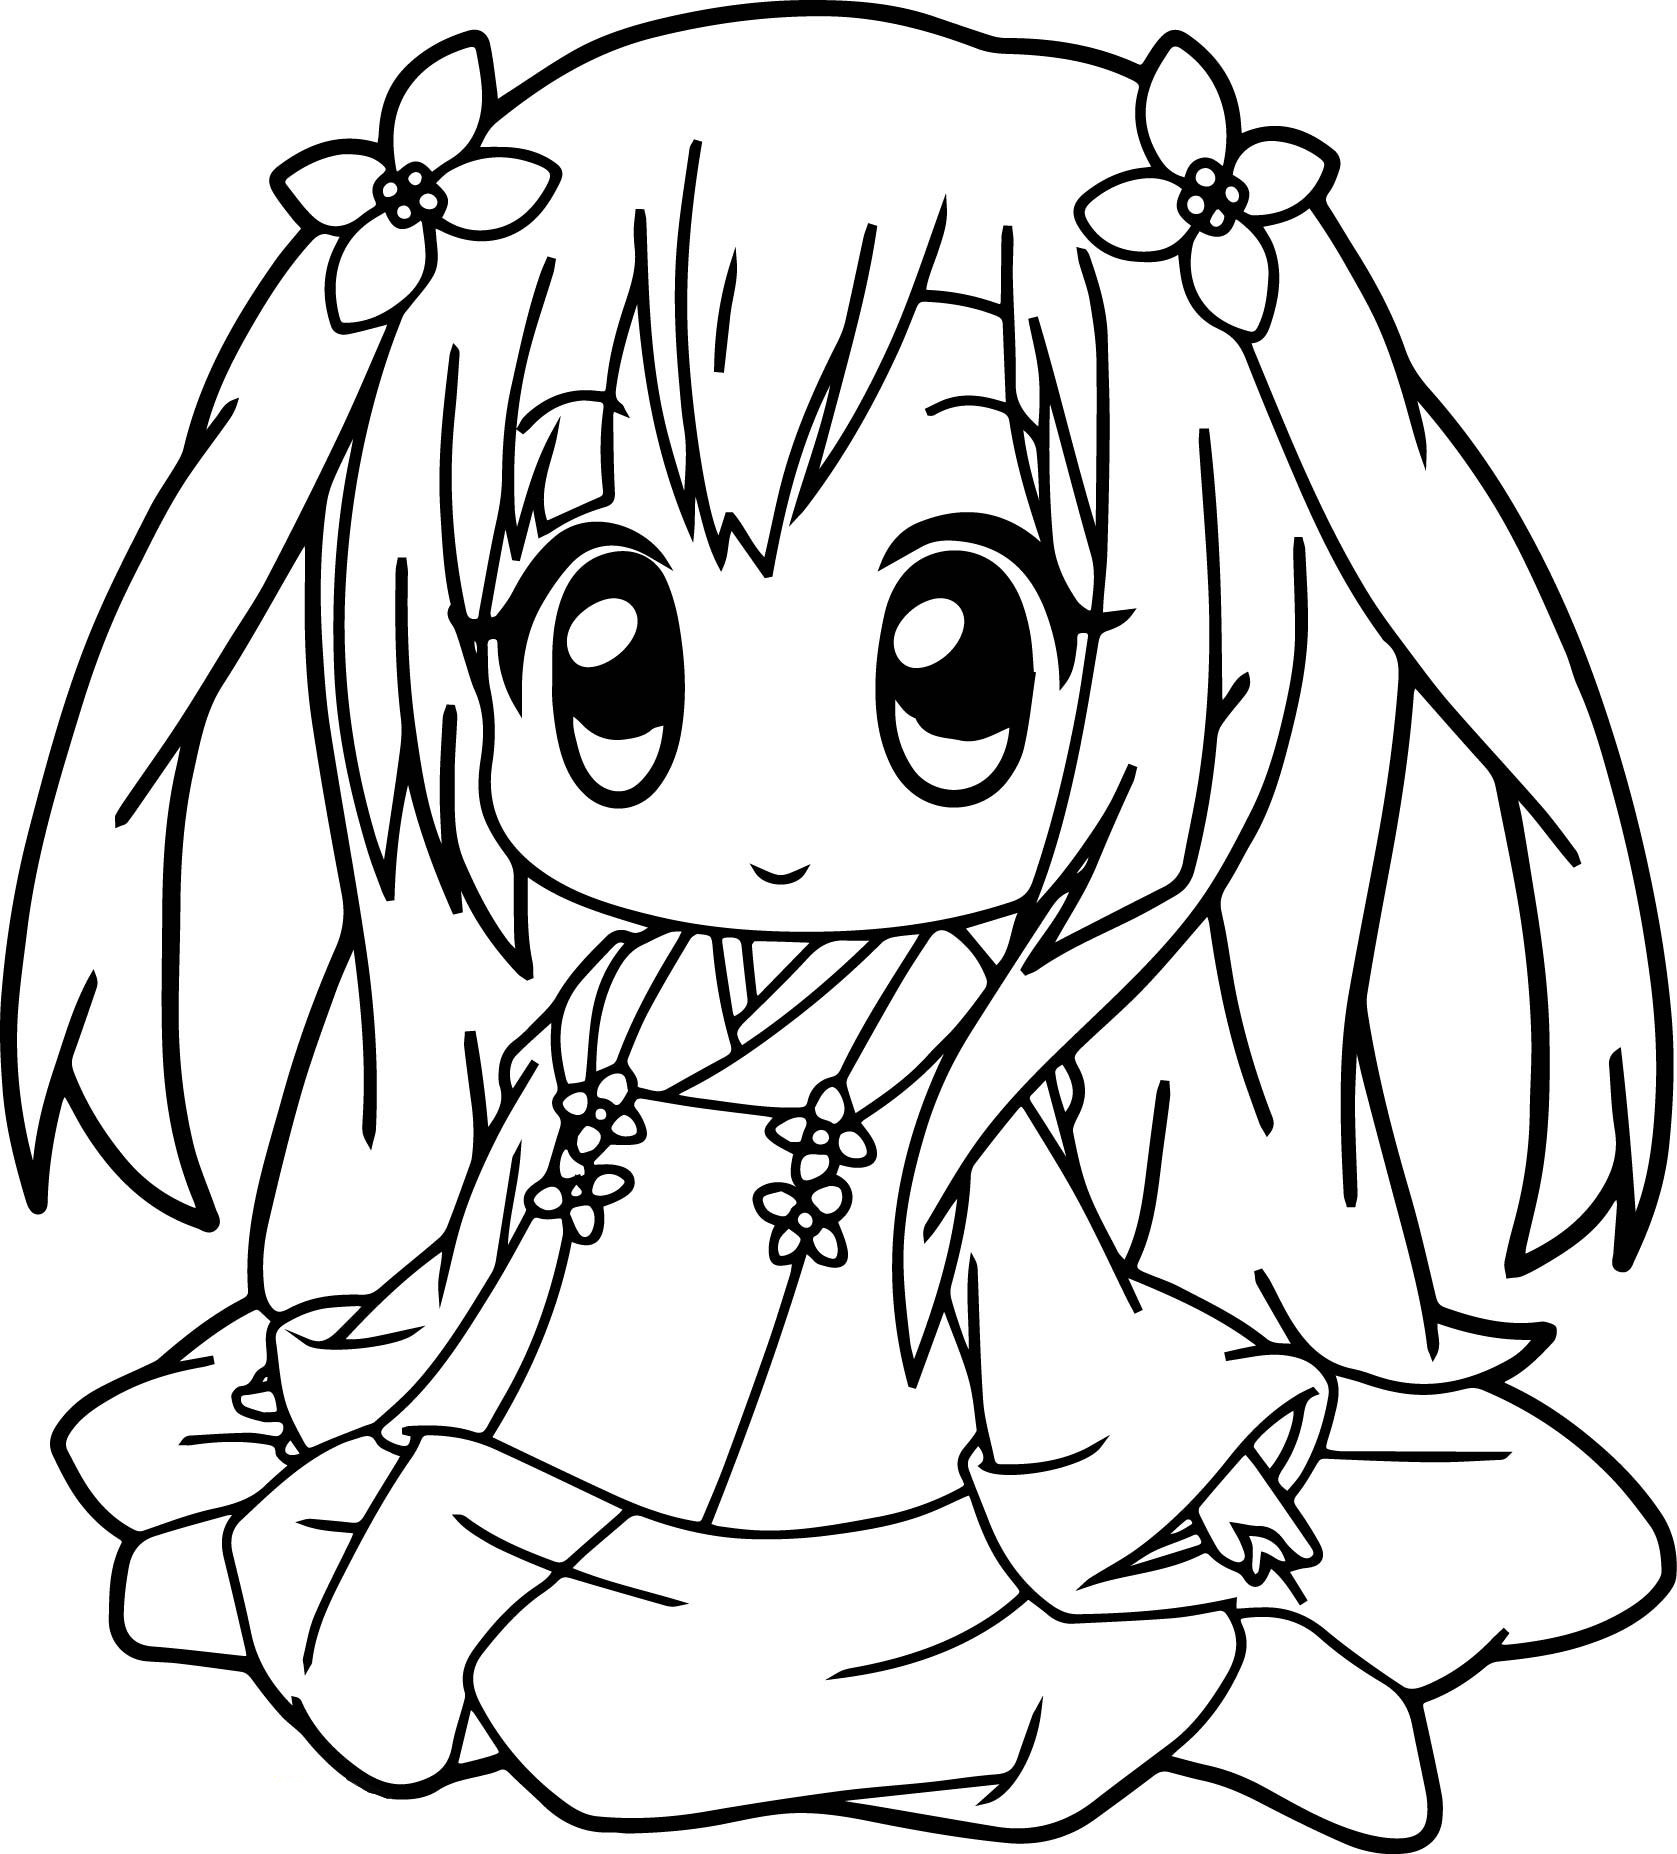 Manga Coloring Pages For Kids
 Cute Coloring Pages Best Coloring Pages For Kids